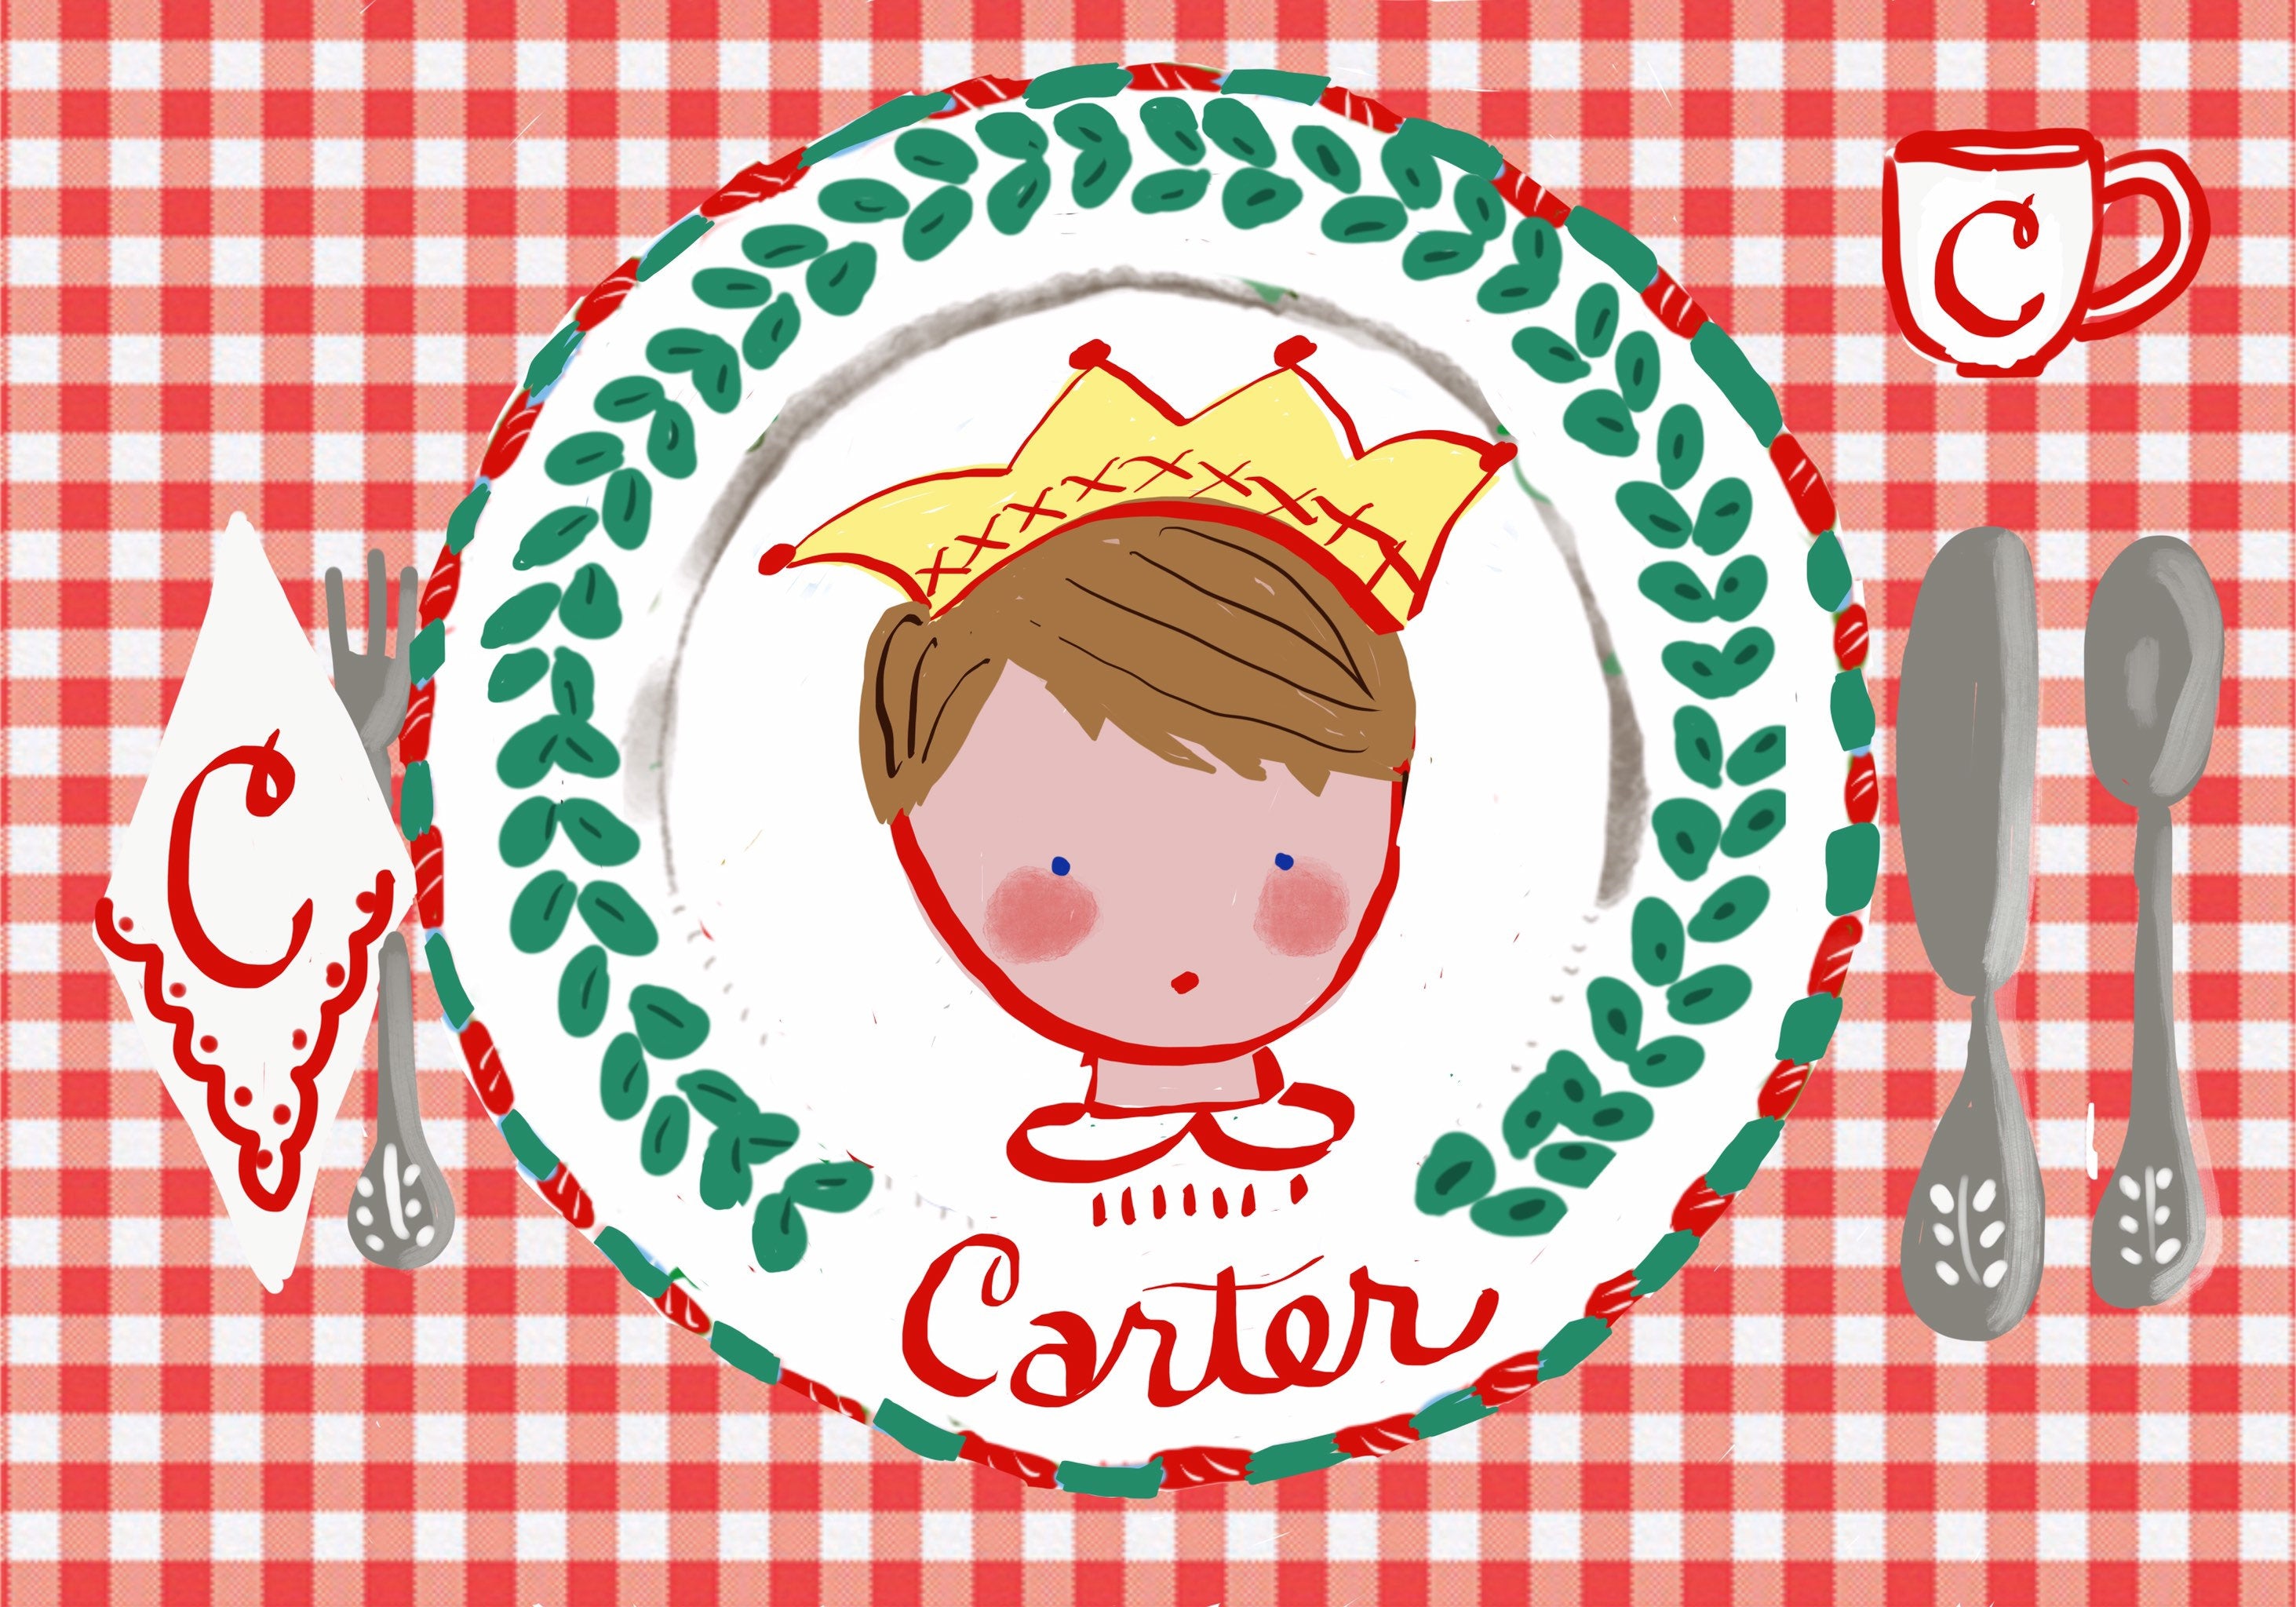 Laminated Placemat - Christmas - Tricia Lowenfield Design